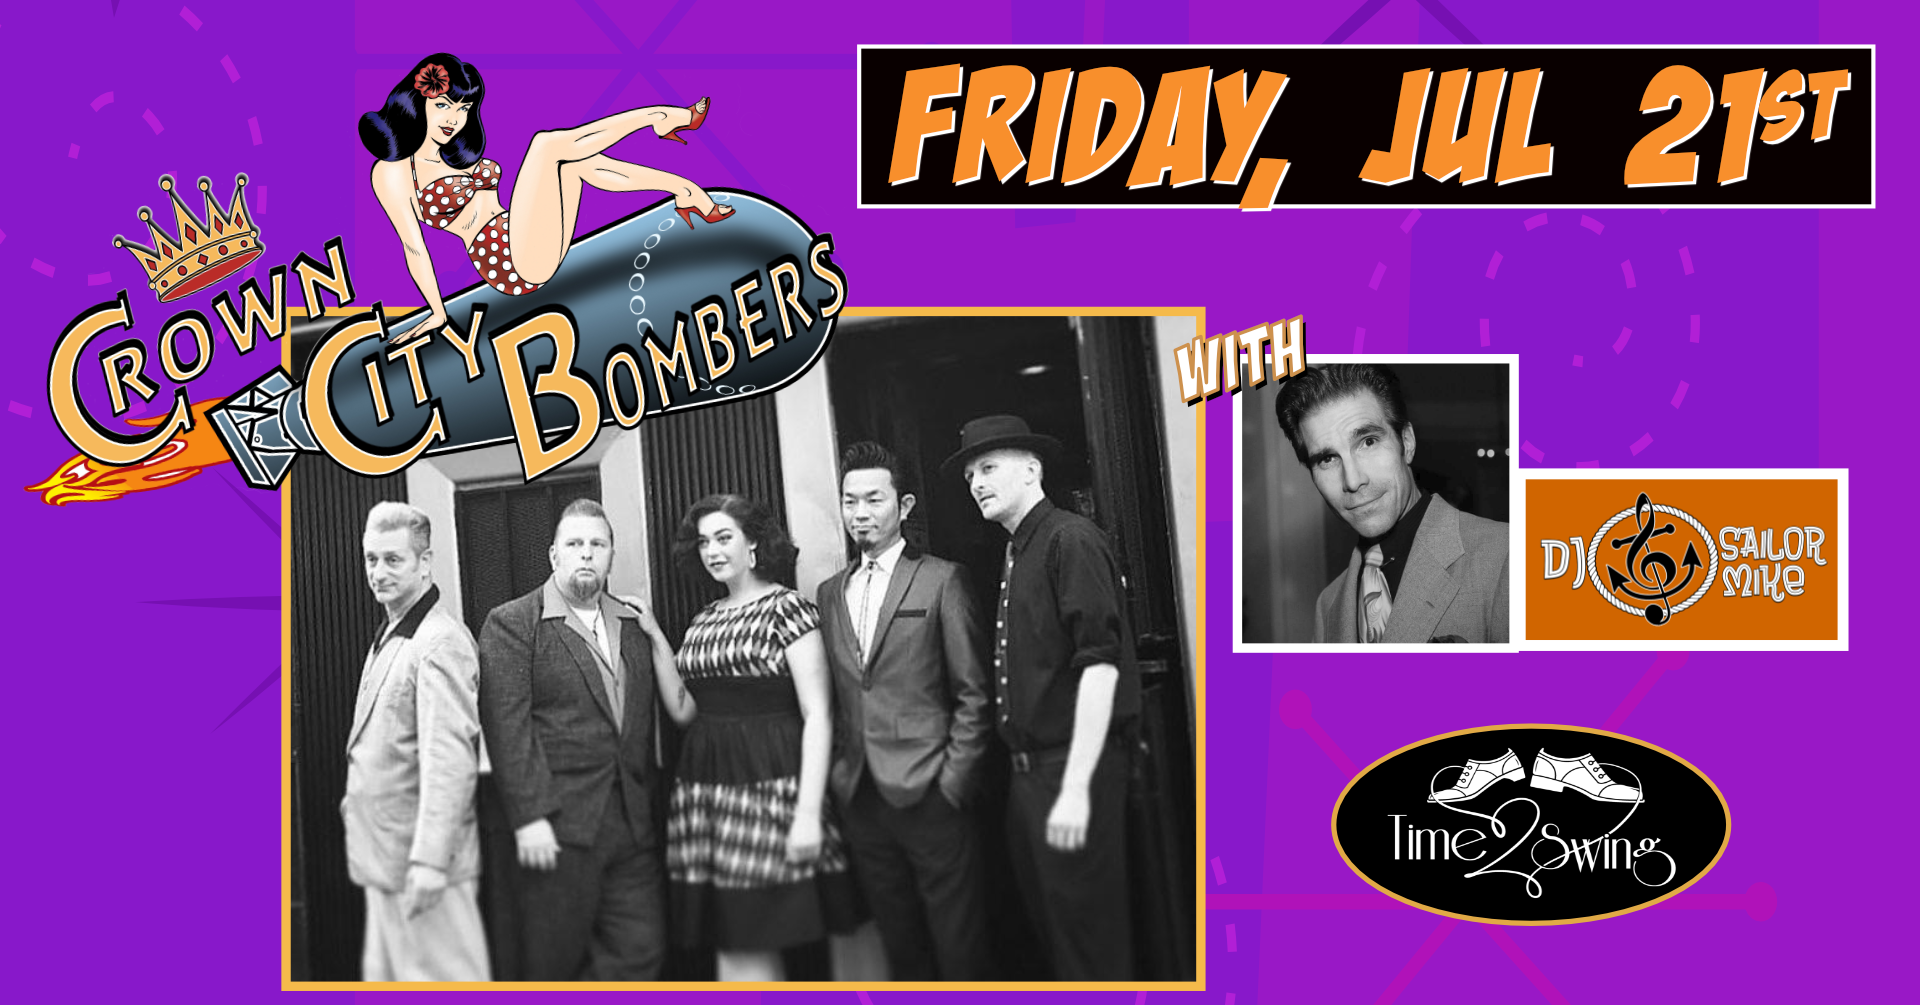 CROWN CITY BOMBERS LA RECORD RELEASE with DJ SAILOR MIKE at The Moose!